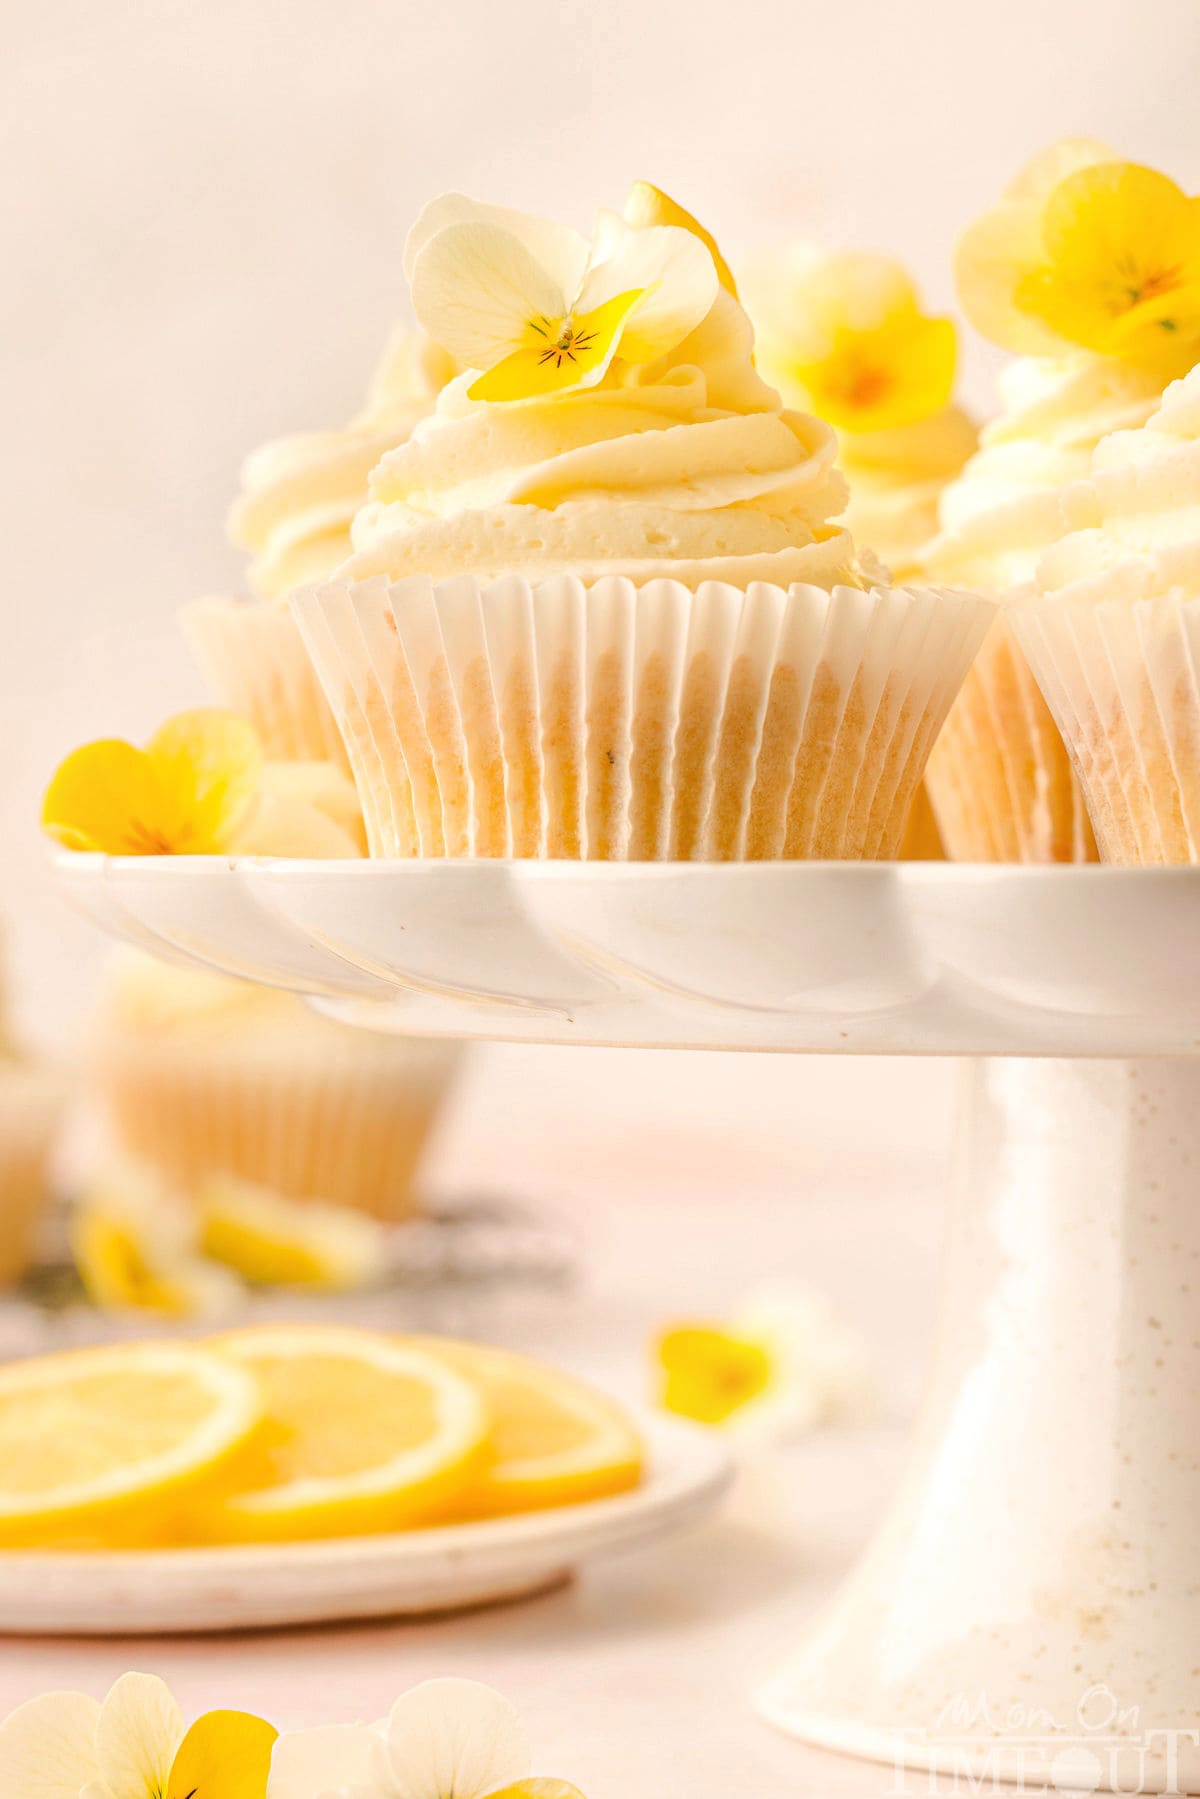 Lemon cupcakes on a scalloped edge white cake stand. Lemon slices and more cupcakes can be seen in the background.